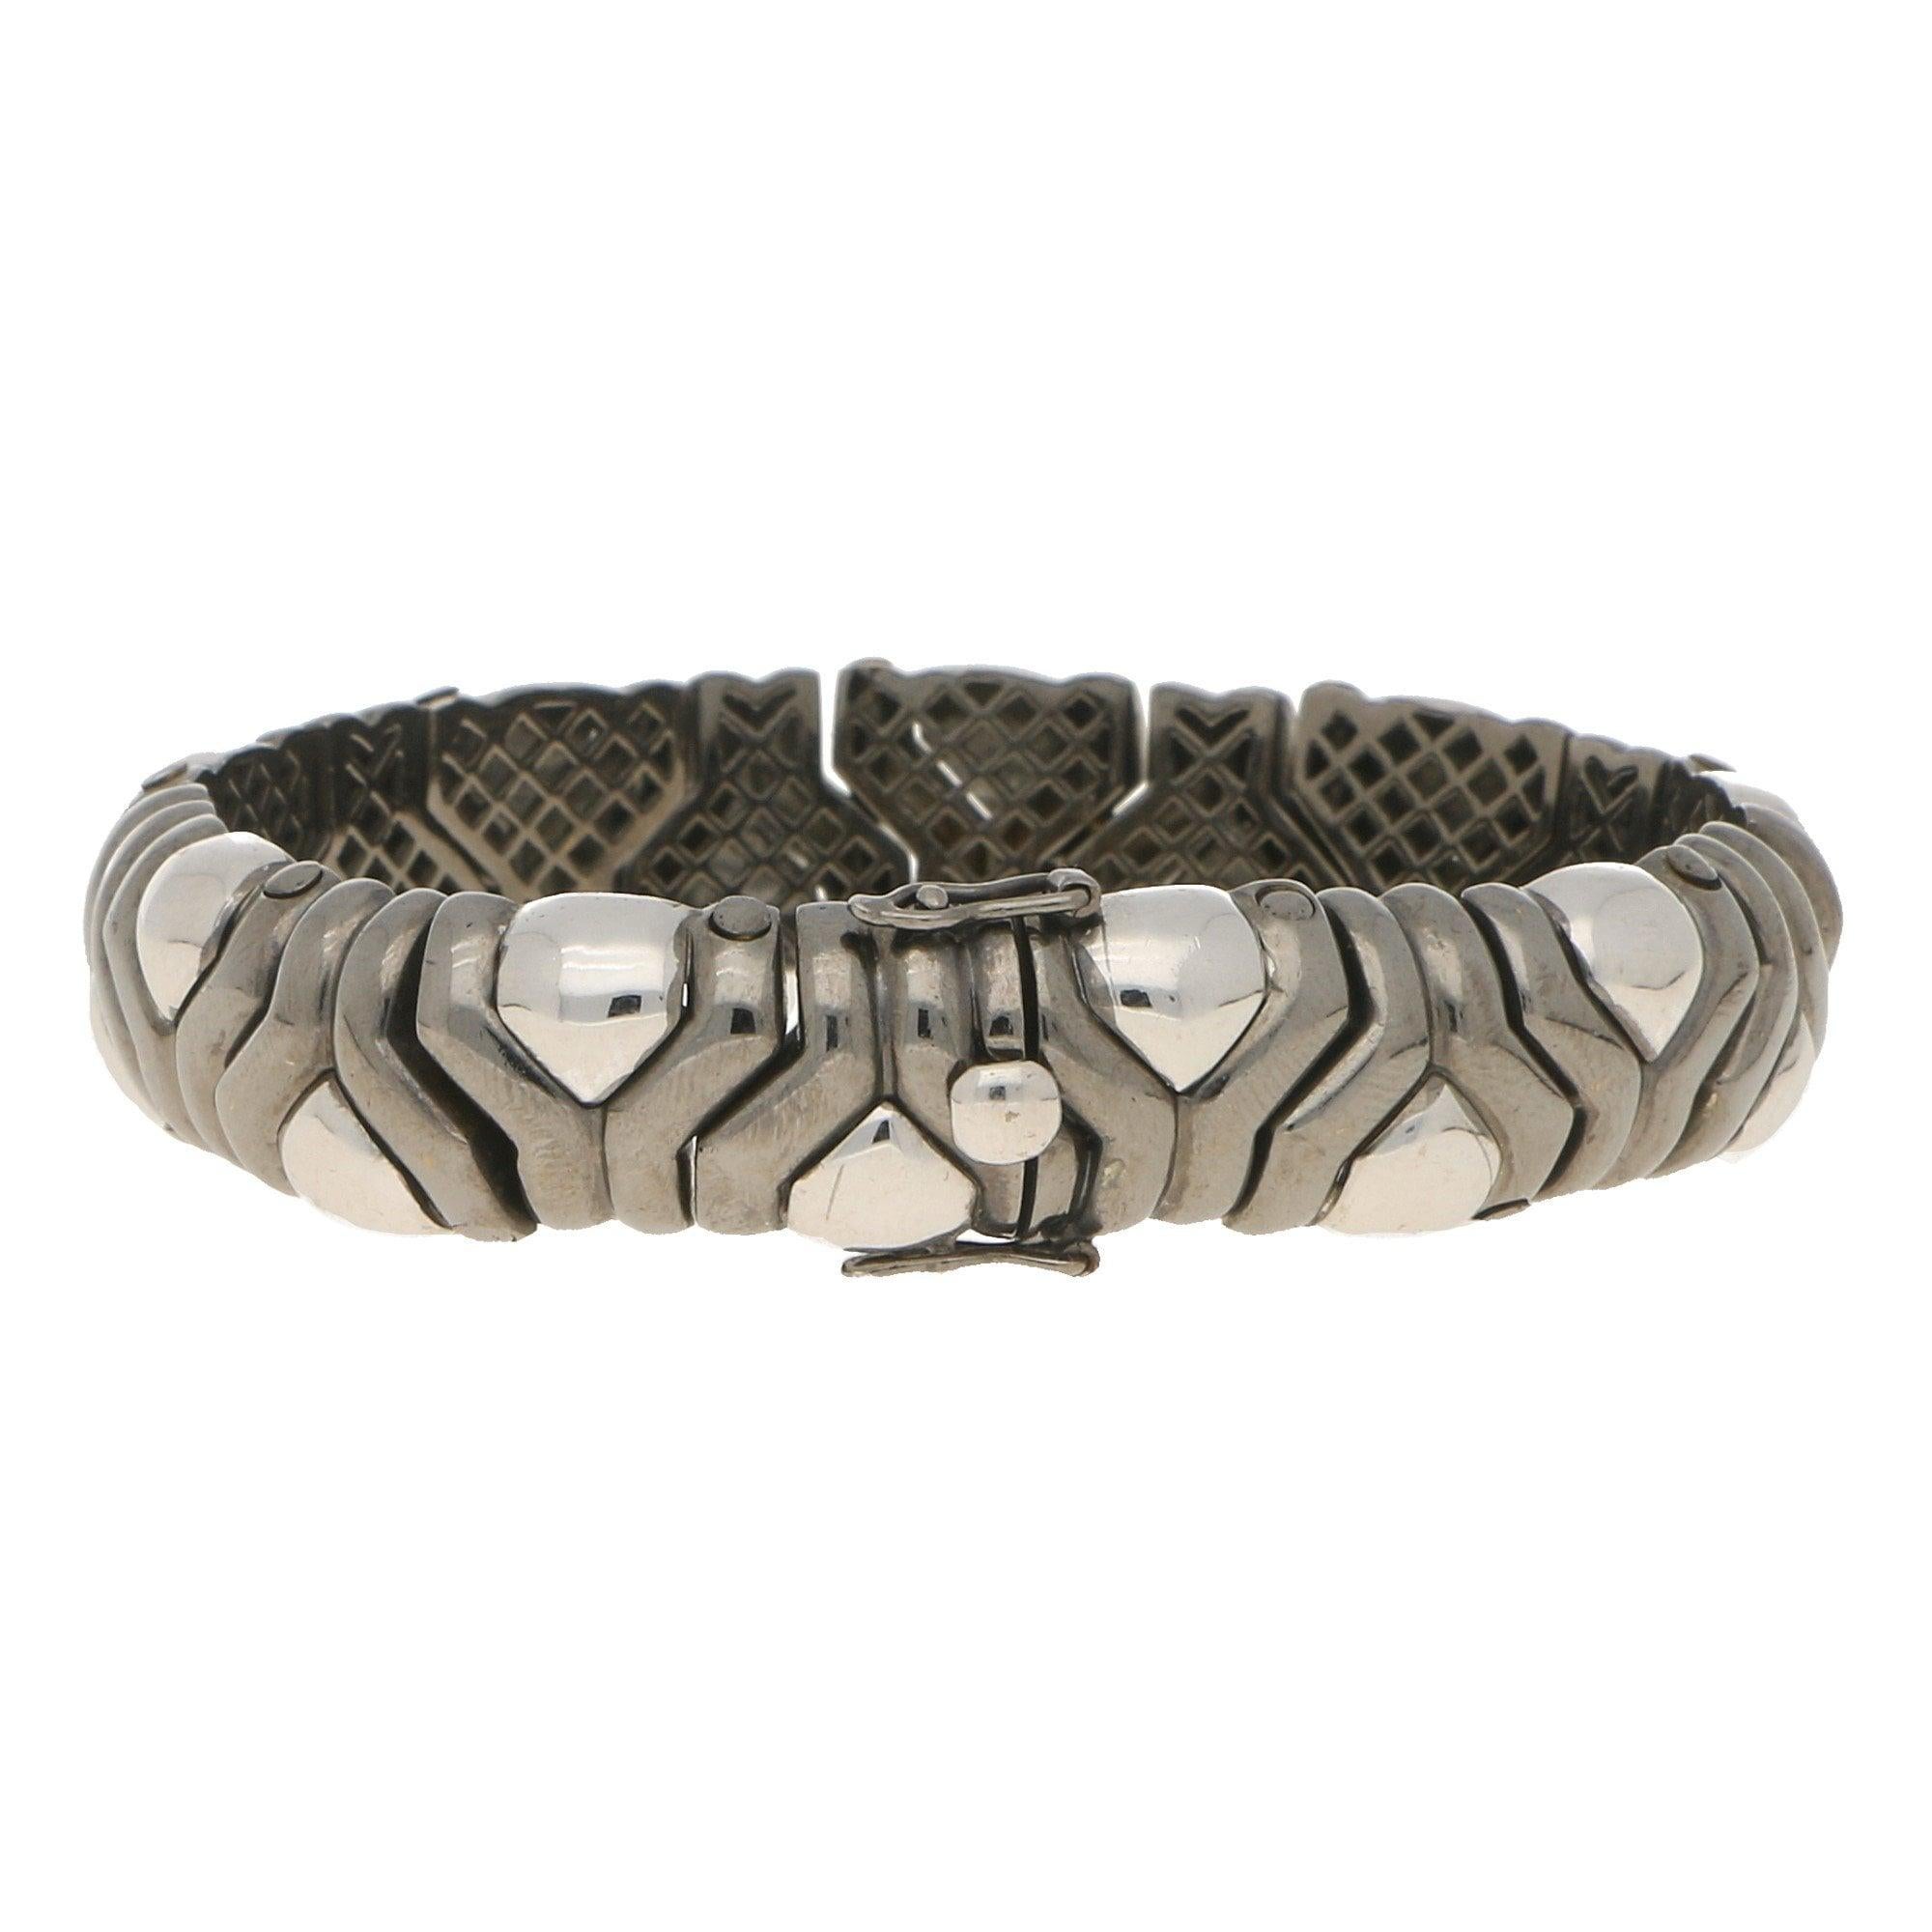 Women's or Men's Vintage Italian Aztec Style Mosaic Bracelet in Black and White Gold For Sale